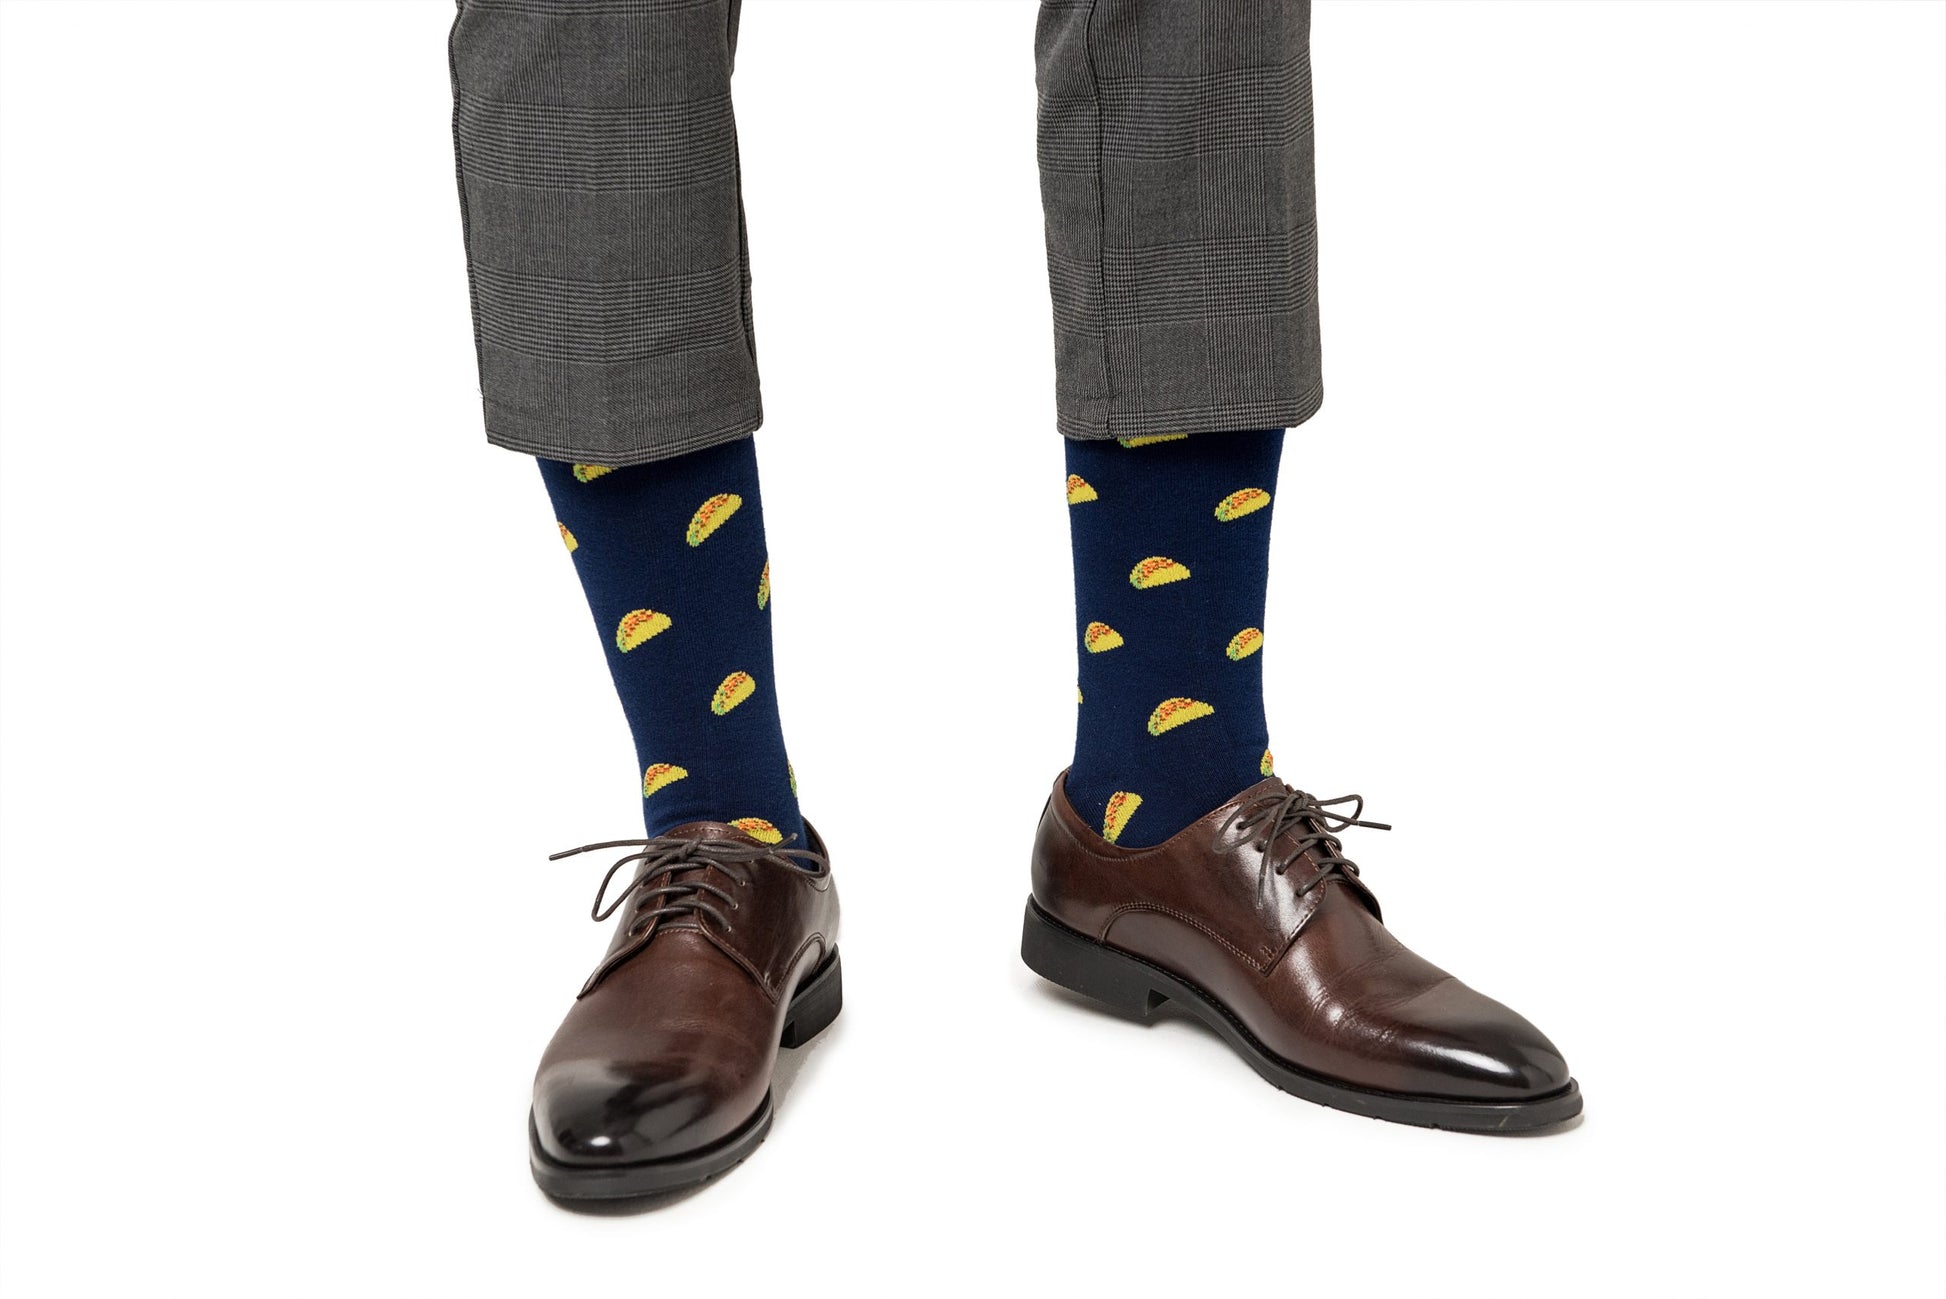 A person wearing gray trousers, blue Taco Socks with yellow taco patterns that add a flavor-packed playfulness, and brown leather dress shoes.